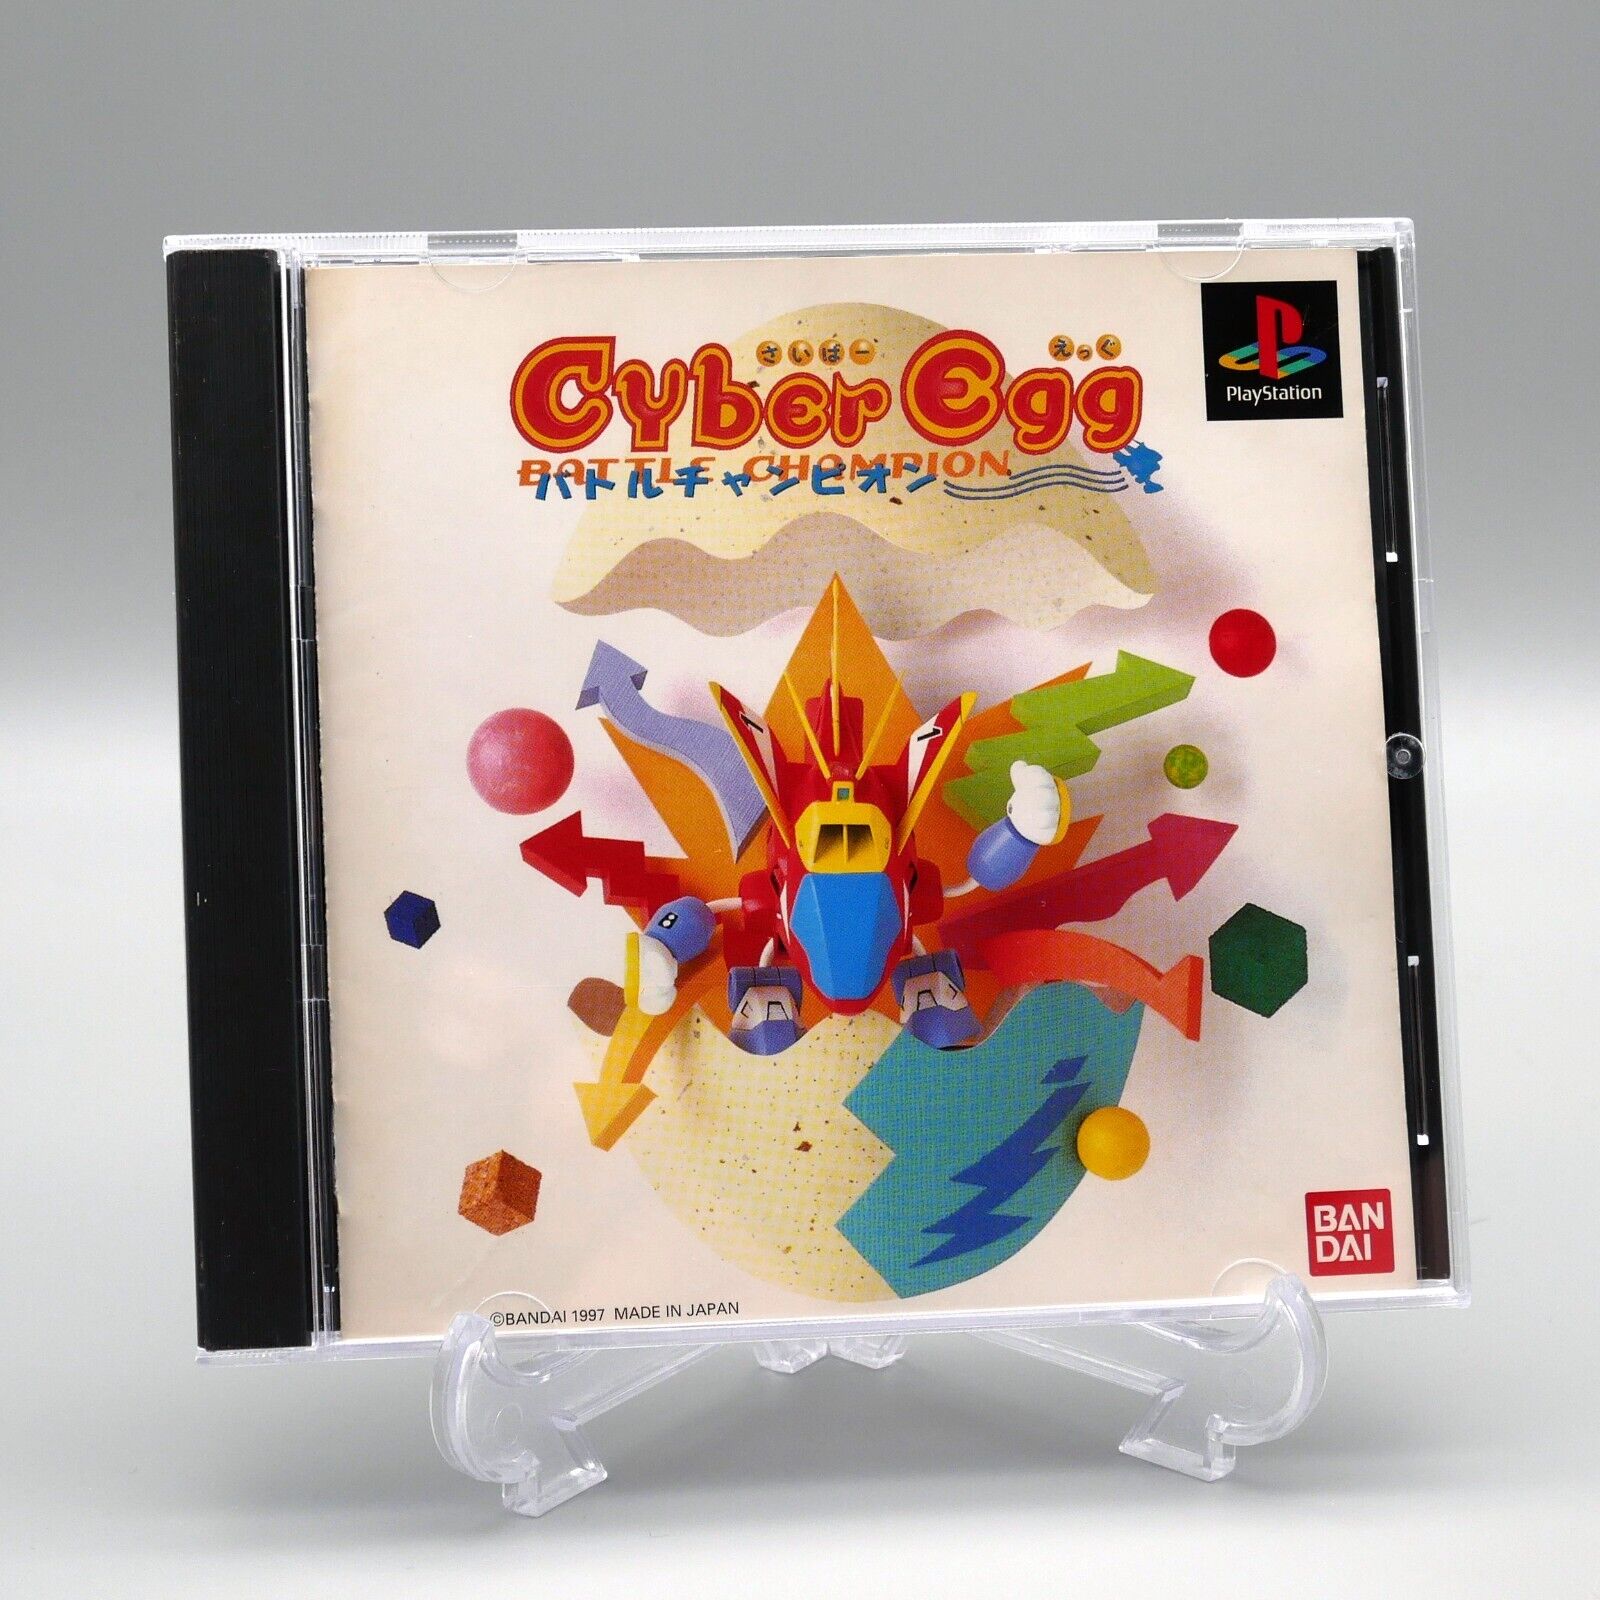 [ PS1 ] CYBER EGG BATTLE CHAMPION - 3D Action - Sony Playstation JAPAN